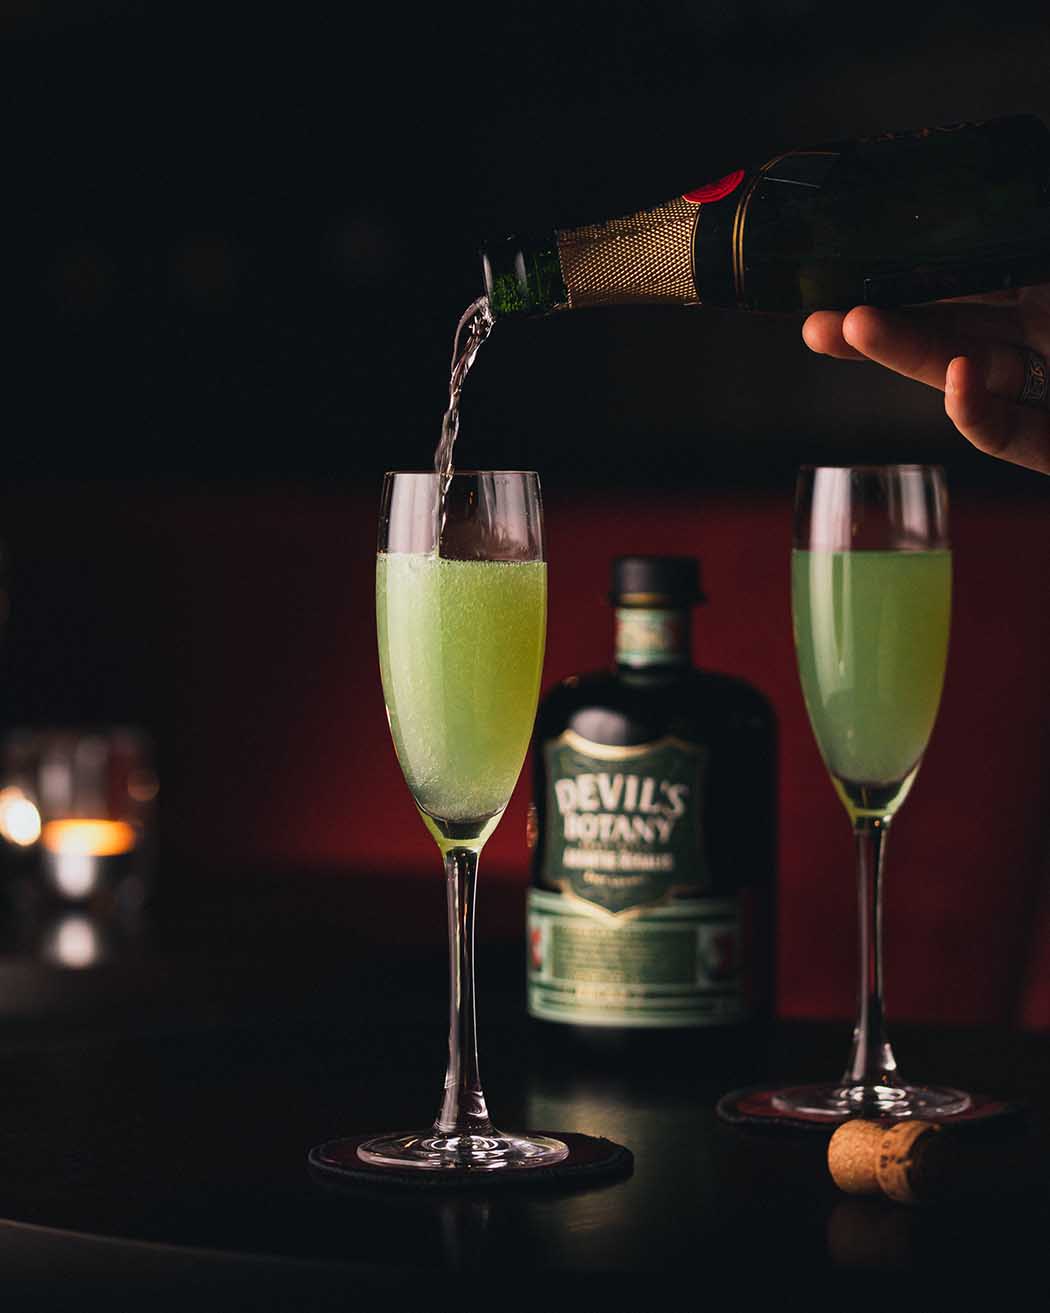 Devil's Botany Absinthe Regalis - Absinthe Royale with Champagne - Absinthe Cocktails - How to drink absinthe 